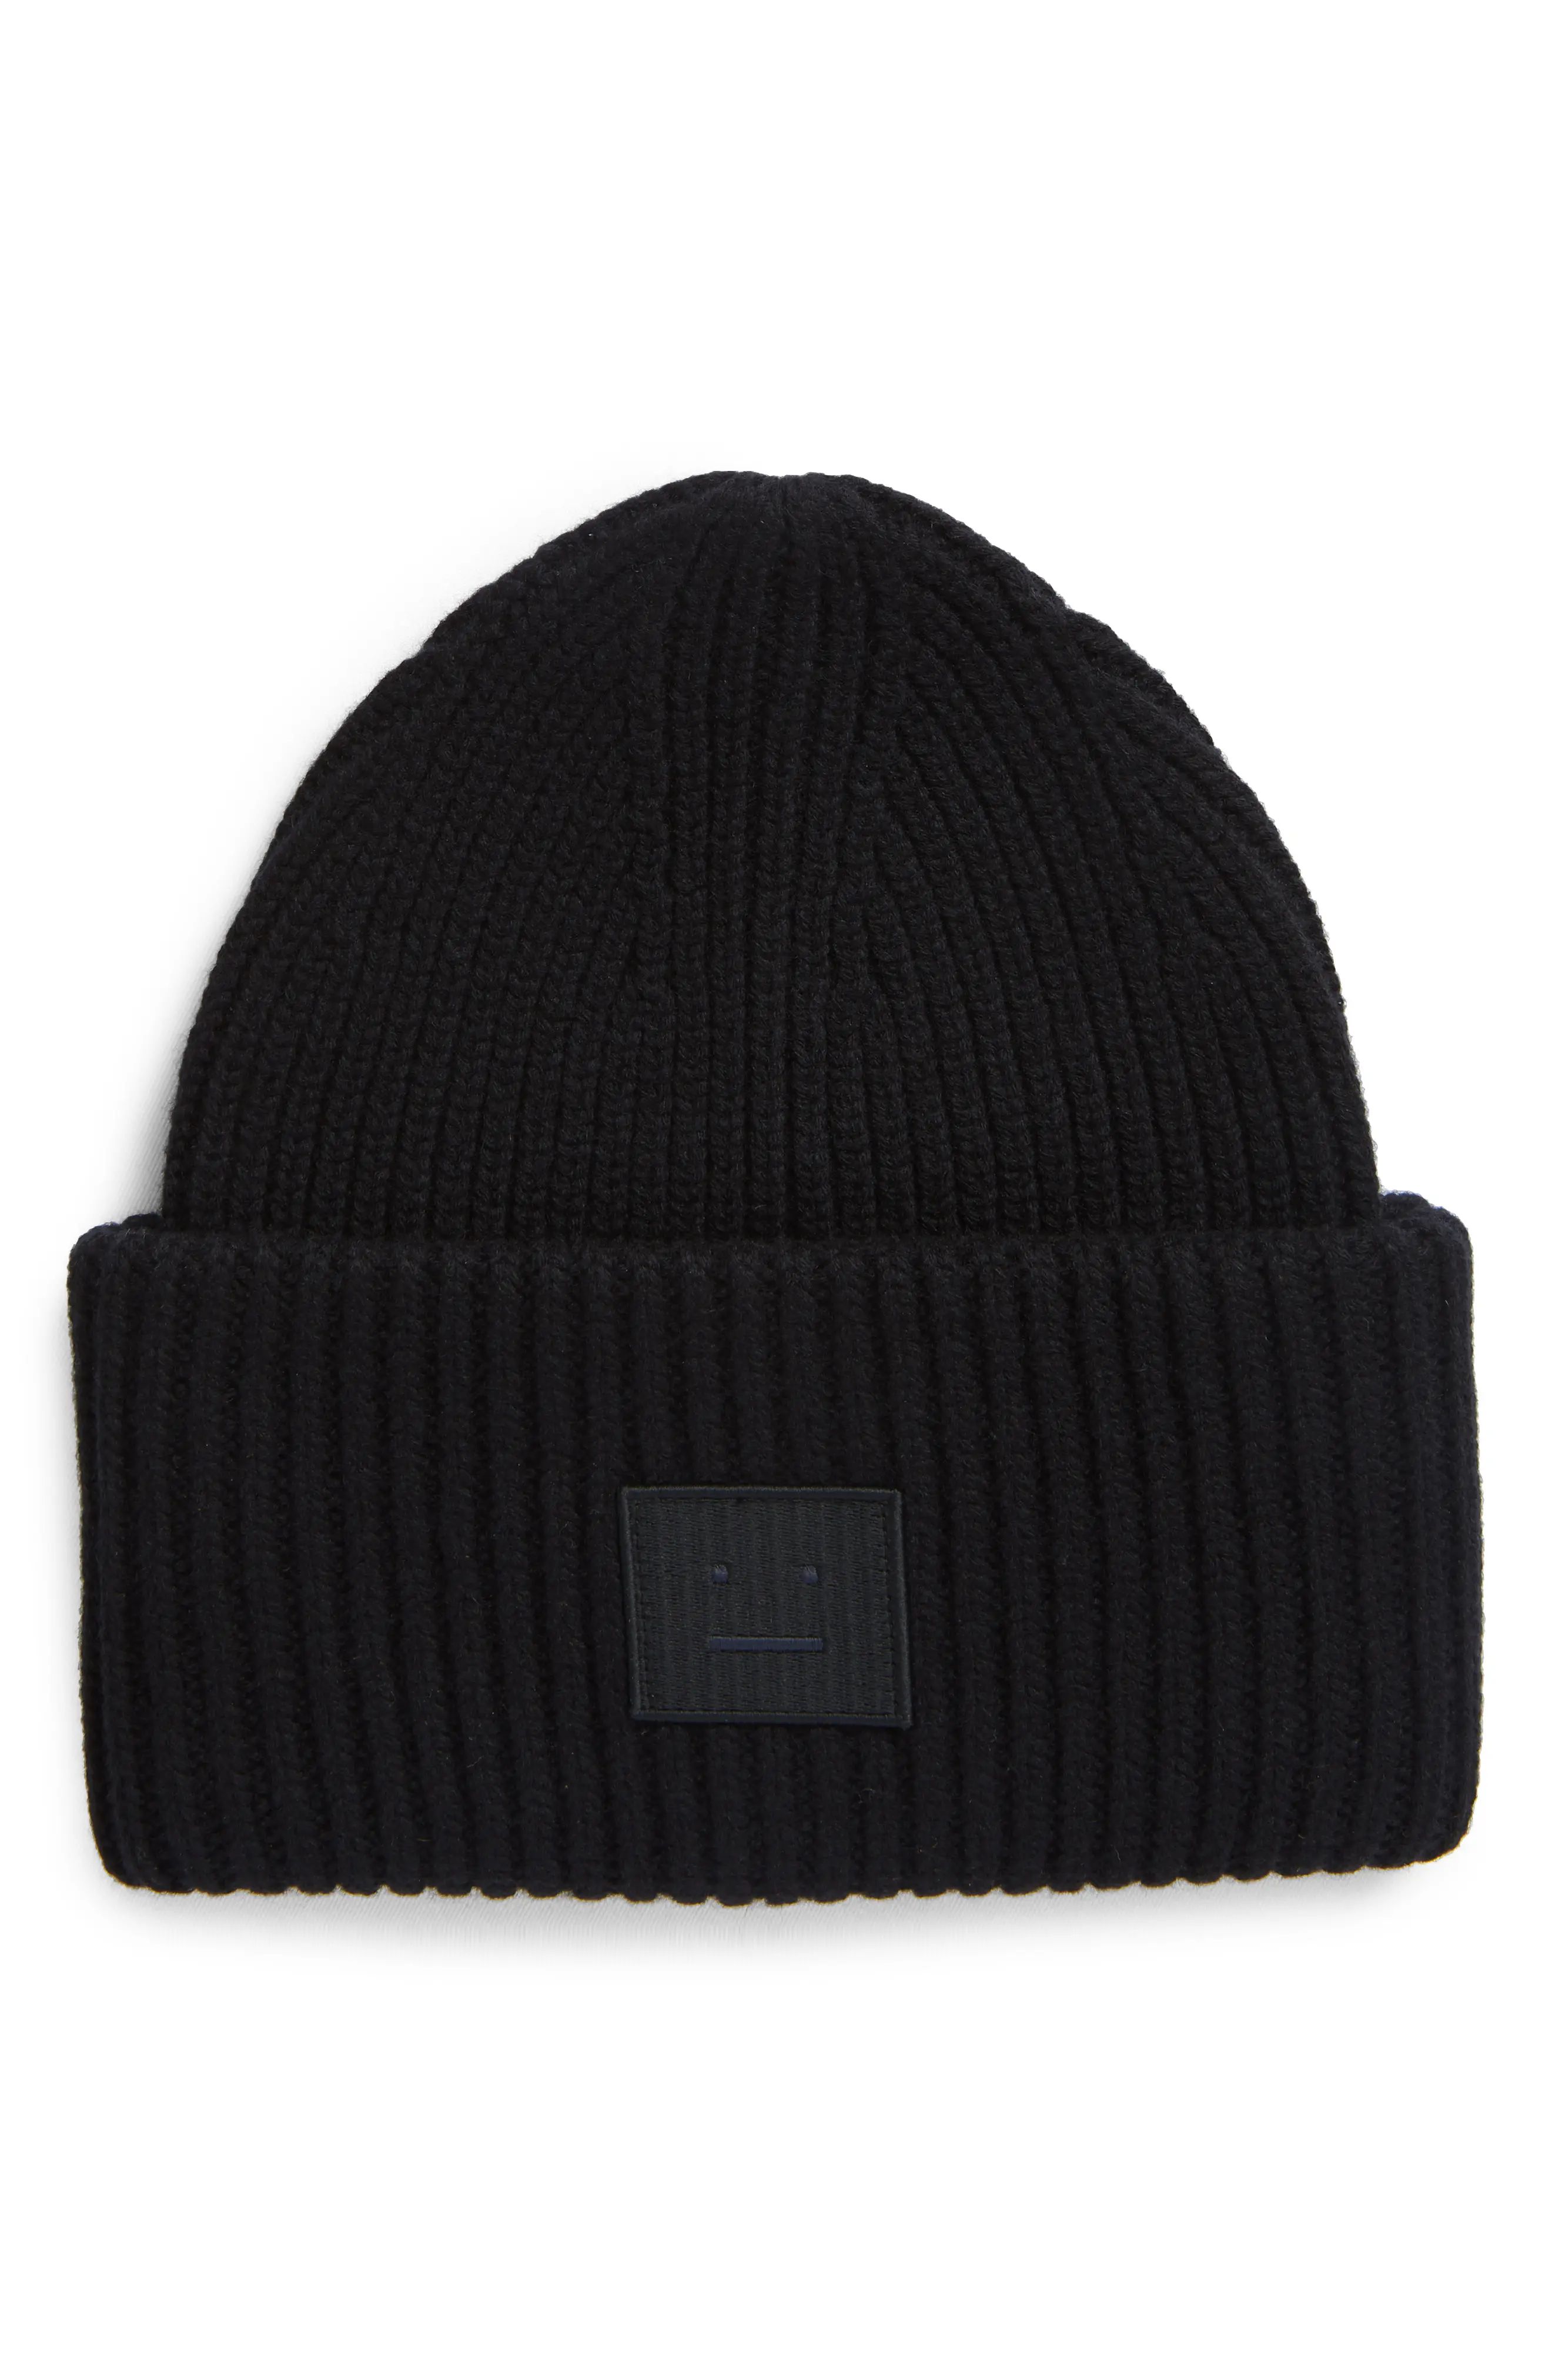 Acne Studios Face Patch Wool Beanie in Black at Nordstrom | Nordstrom